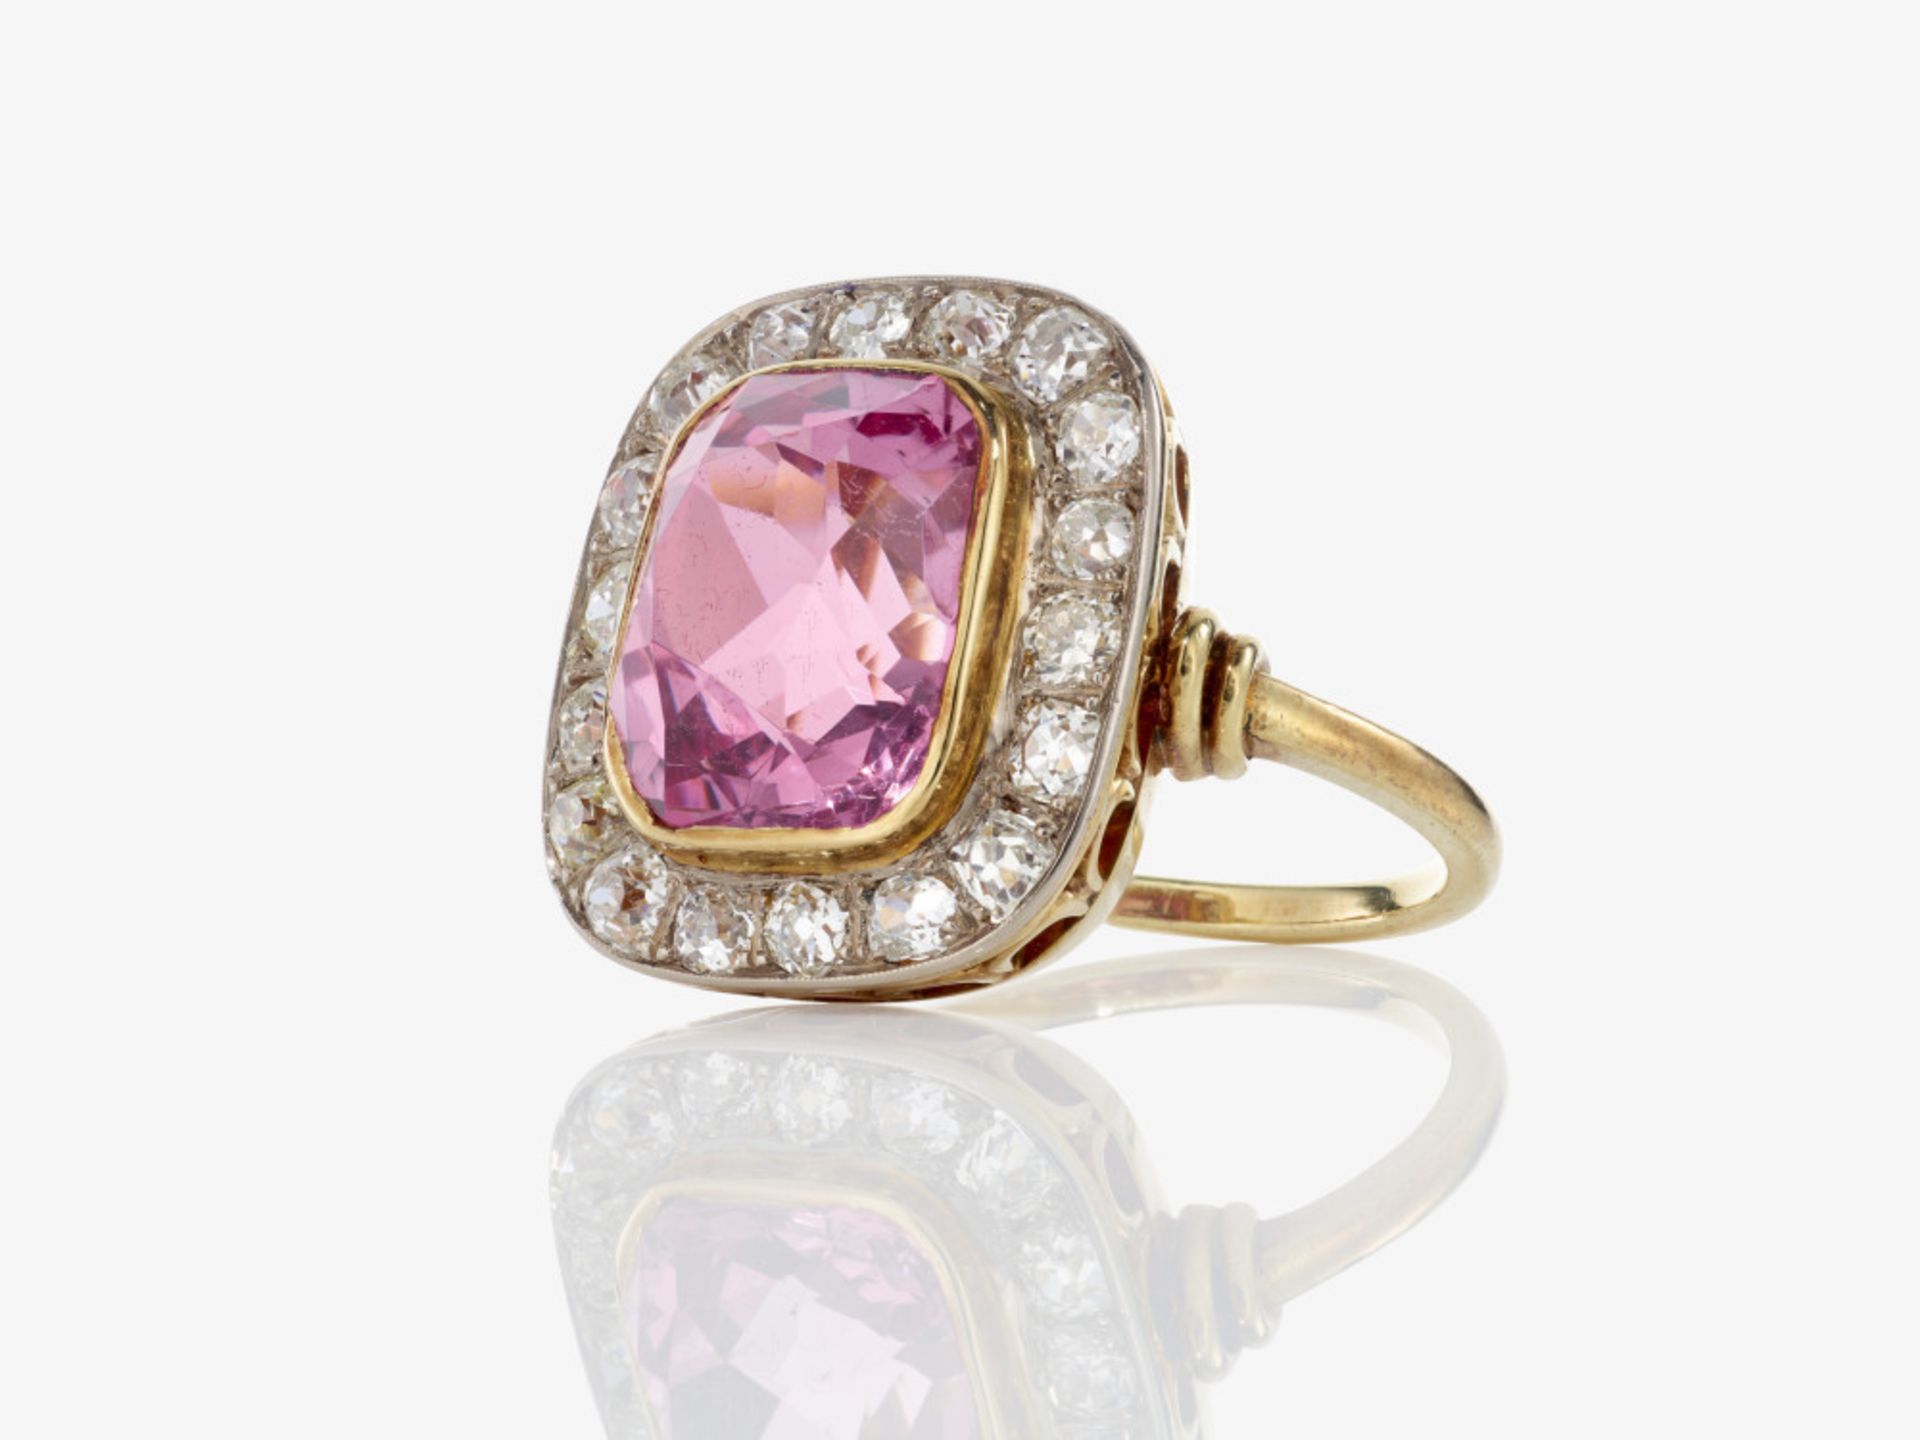 An entourage ring with a pink spinel and old European cut diamonds - Germany, 1950s